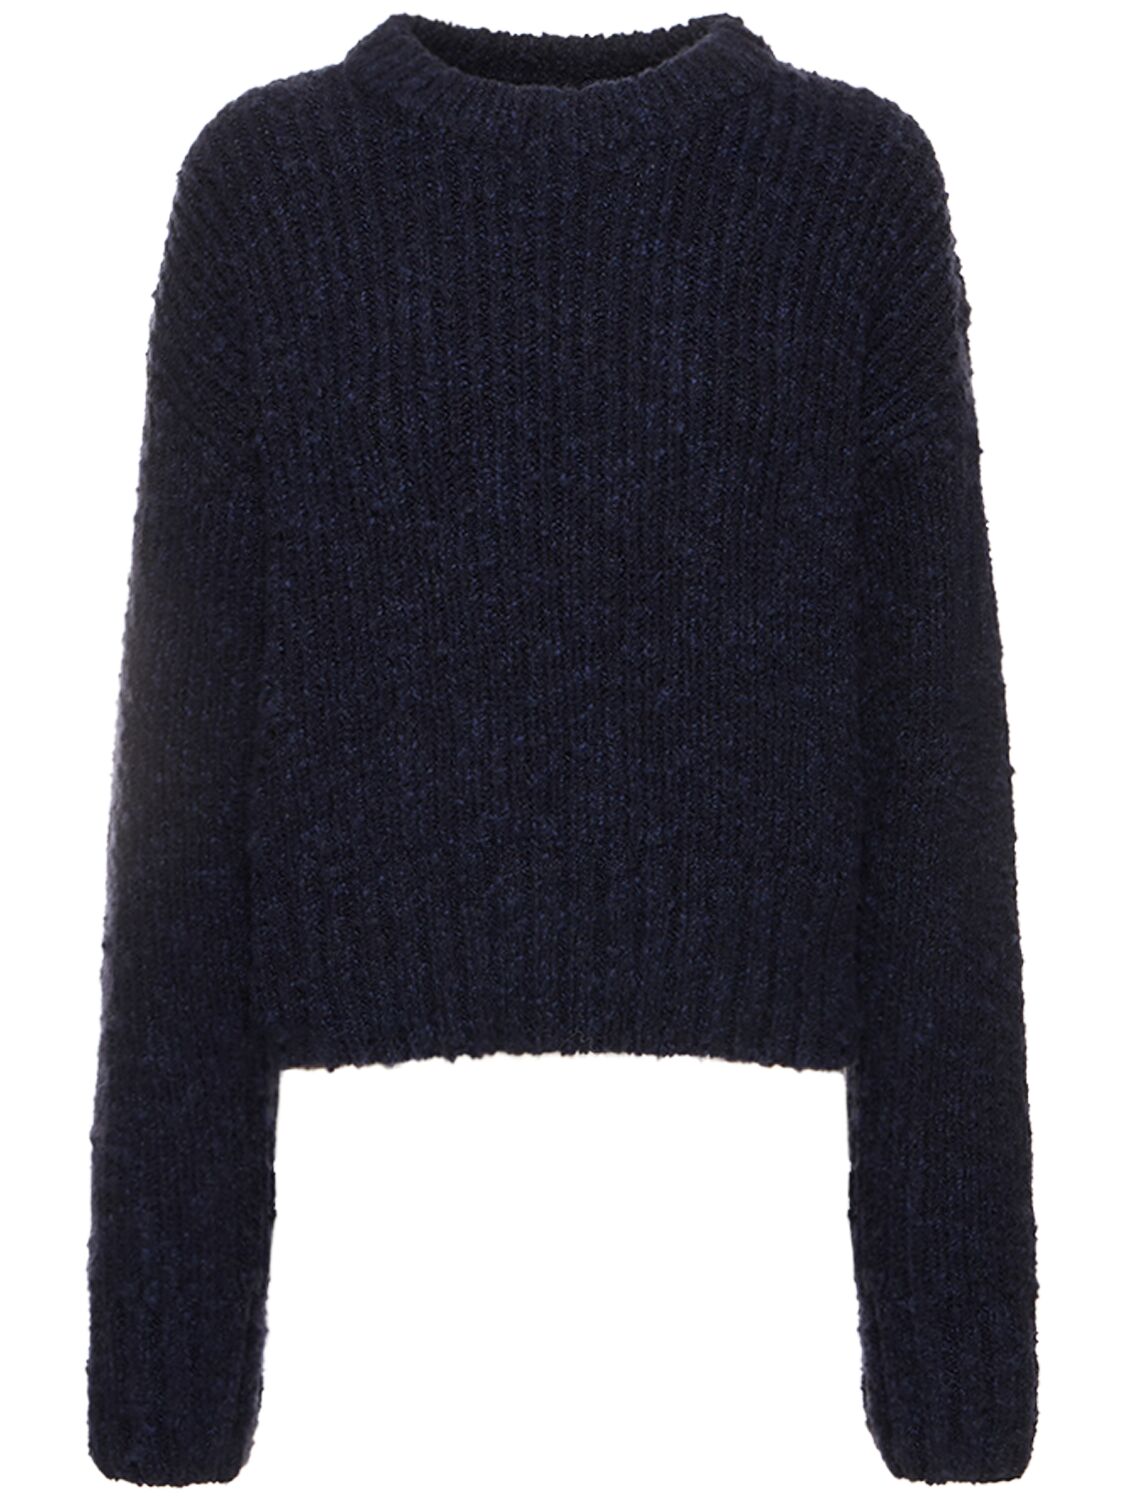 Image of Brushed Textured Wool Sweater